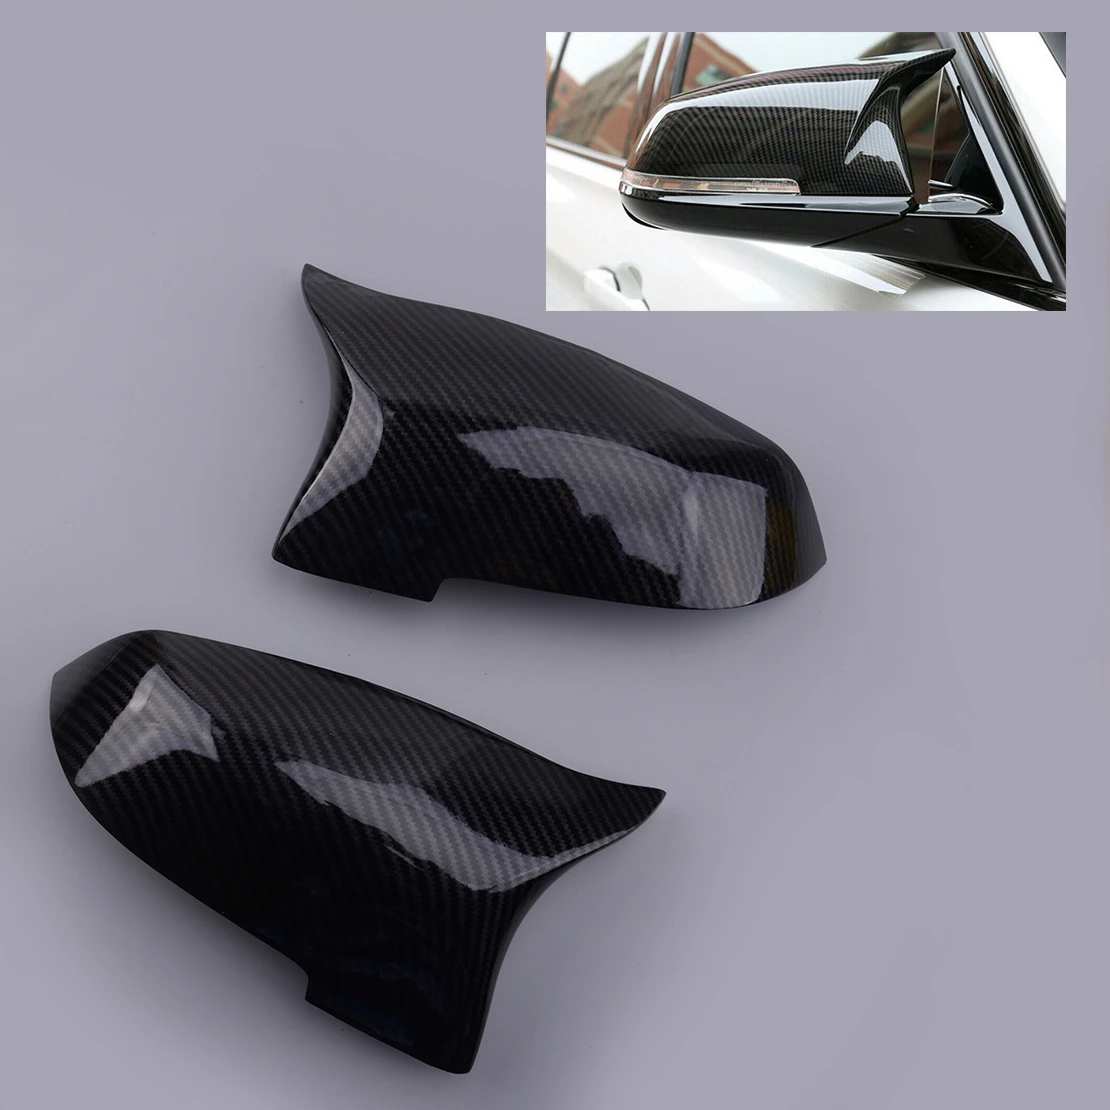 2PCS Side Mirror Cover Cap For BMW 5 6 7 Series F10 F18 F11 F06 F12 F01 Replace